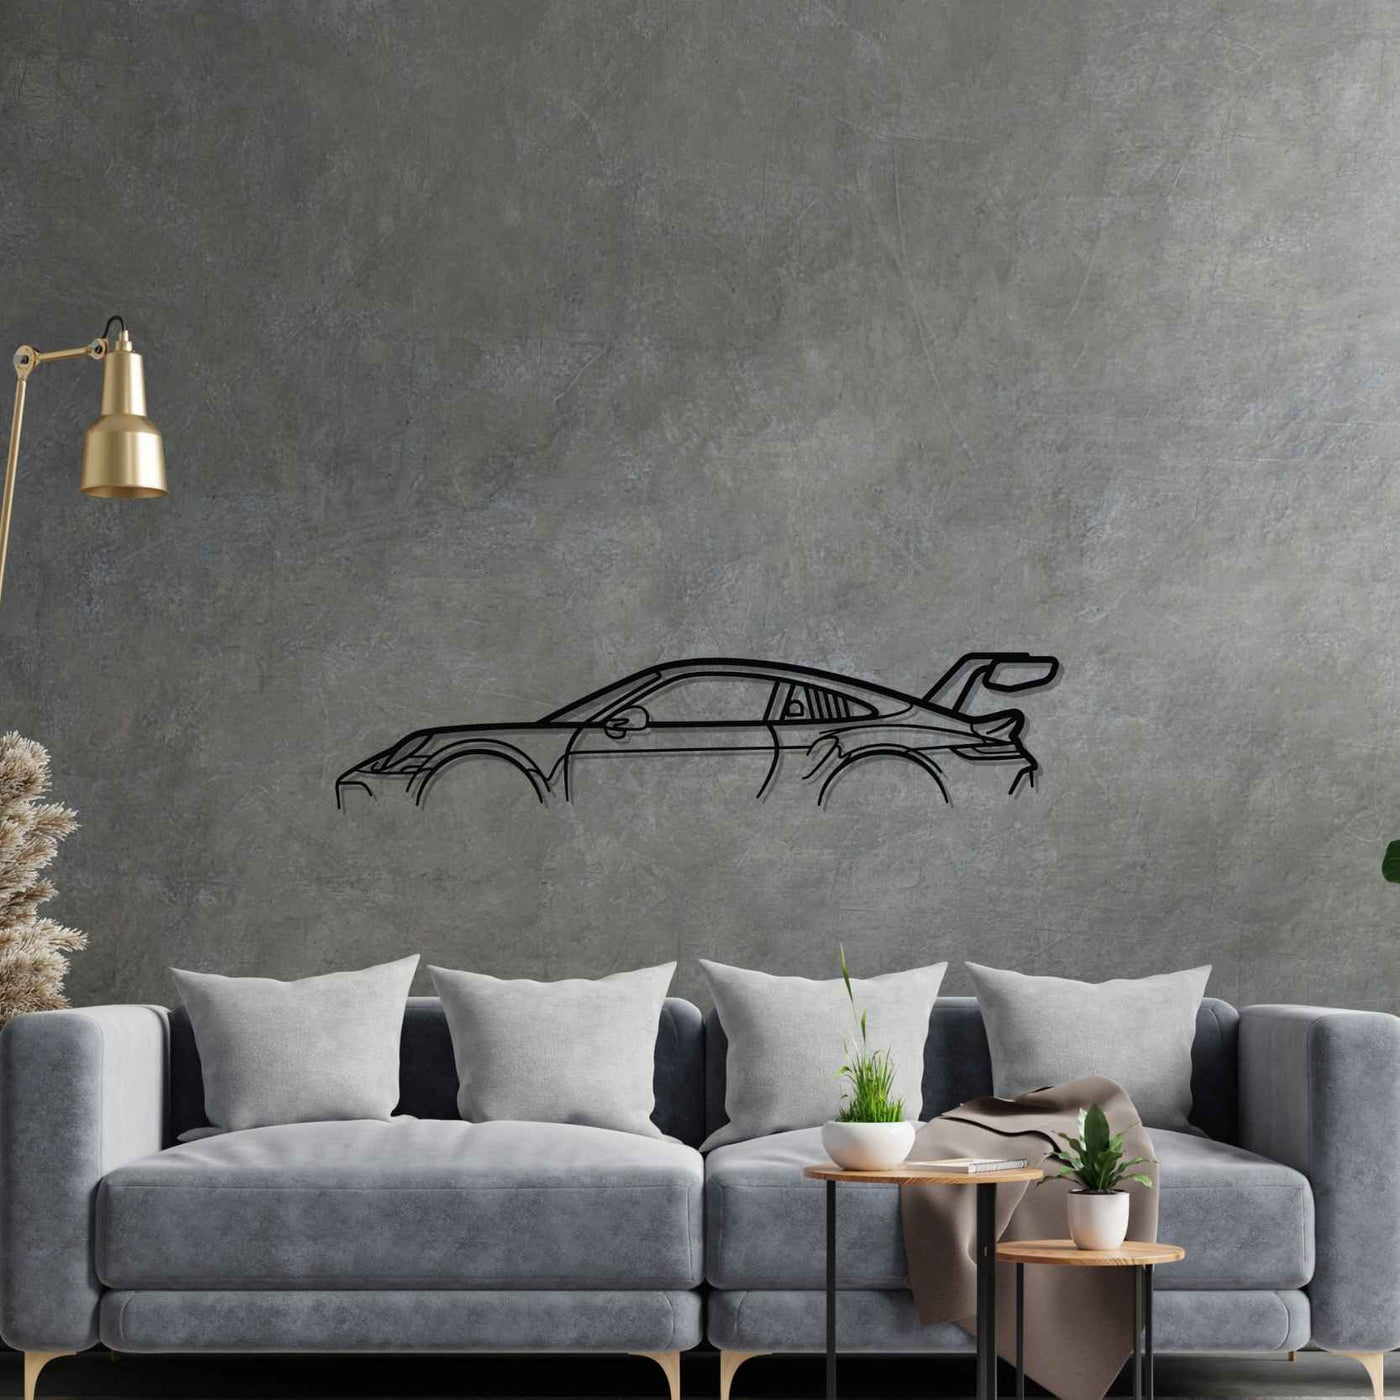 911 GT3 CUP Model 992 Classic Metal Silhouette Wall Art